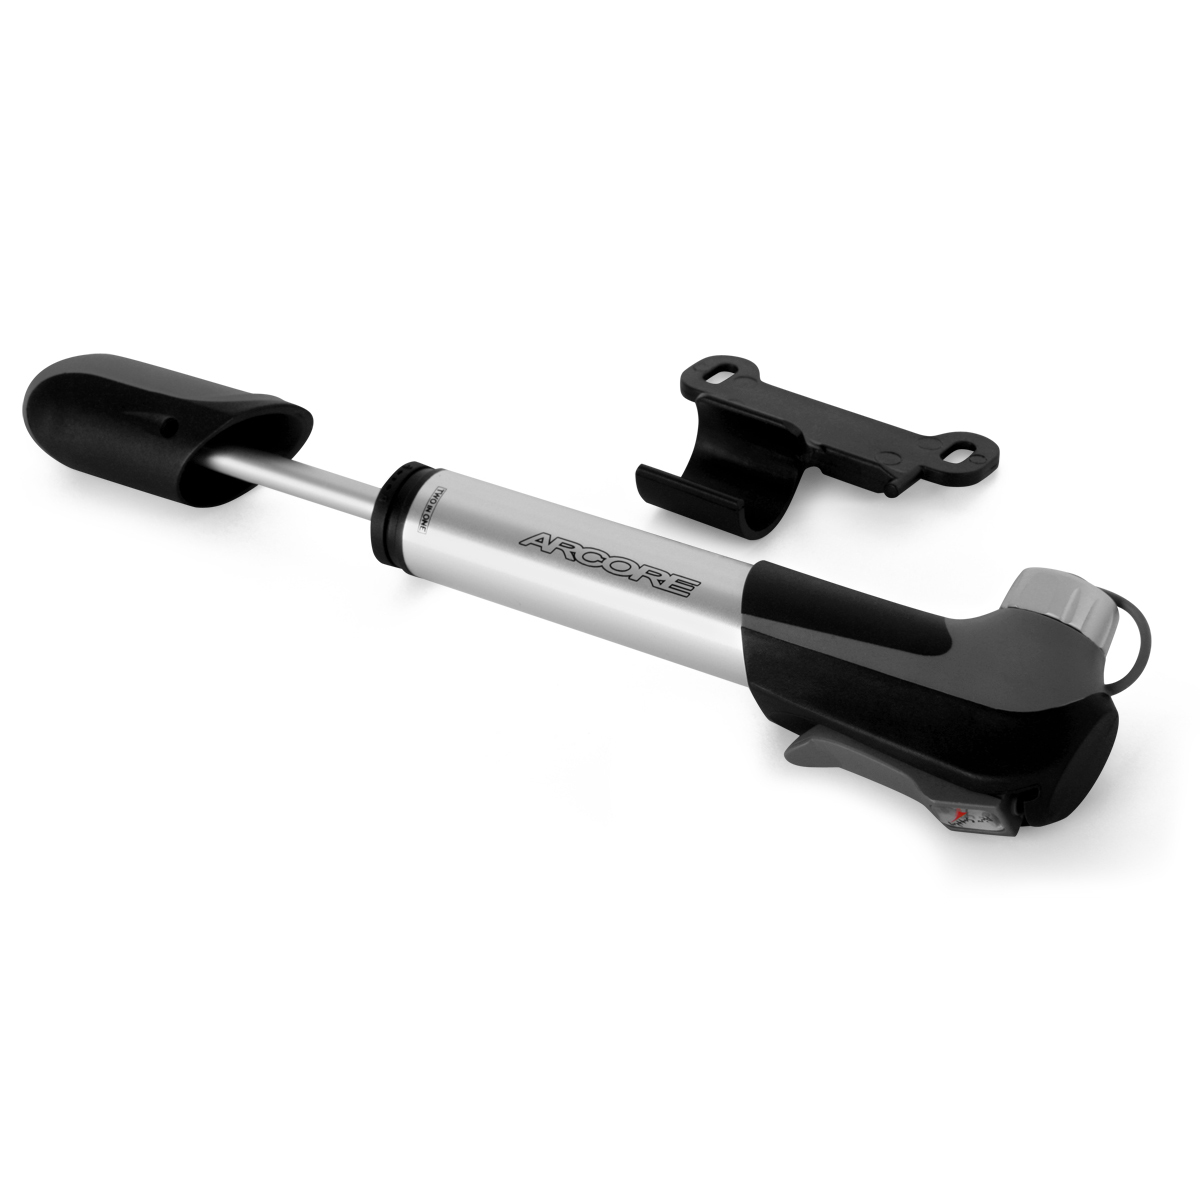 APS-4A - Telescopic bicycle pump with mounting under the bottle holder